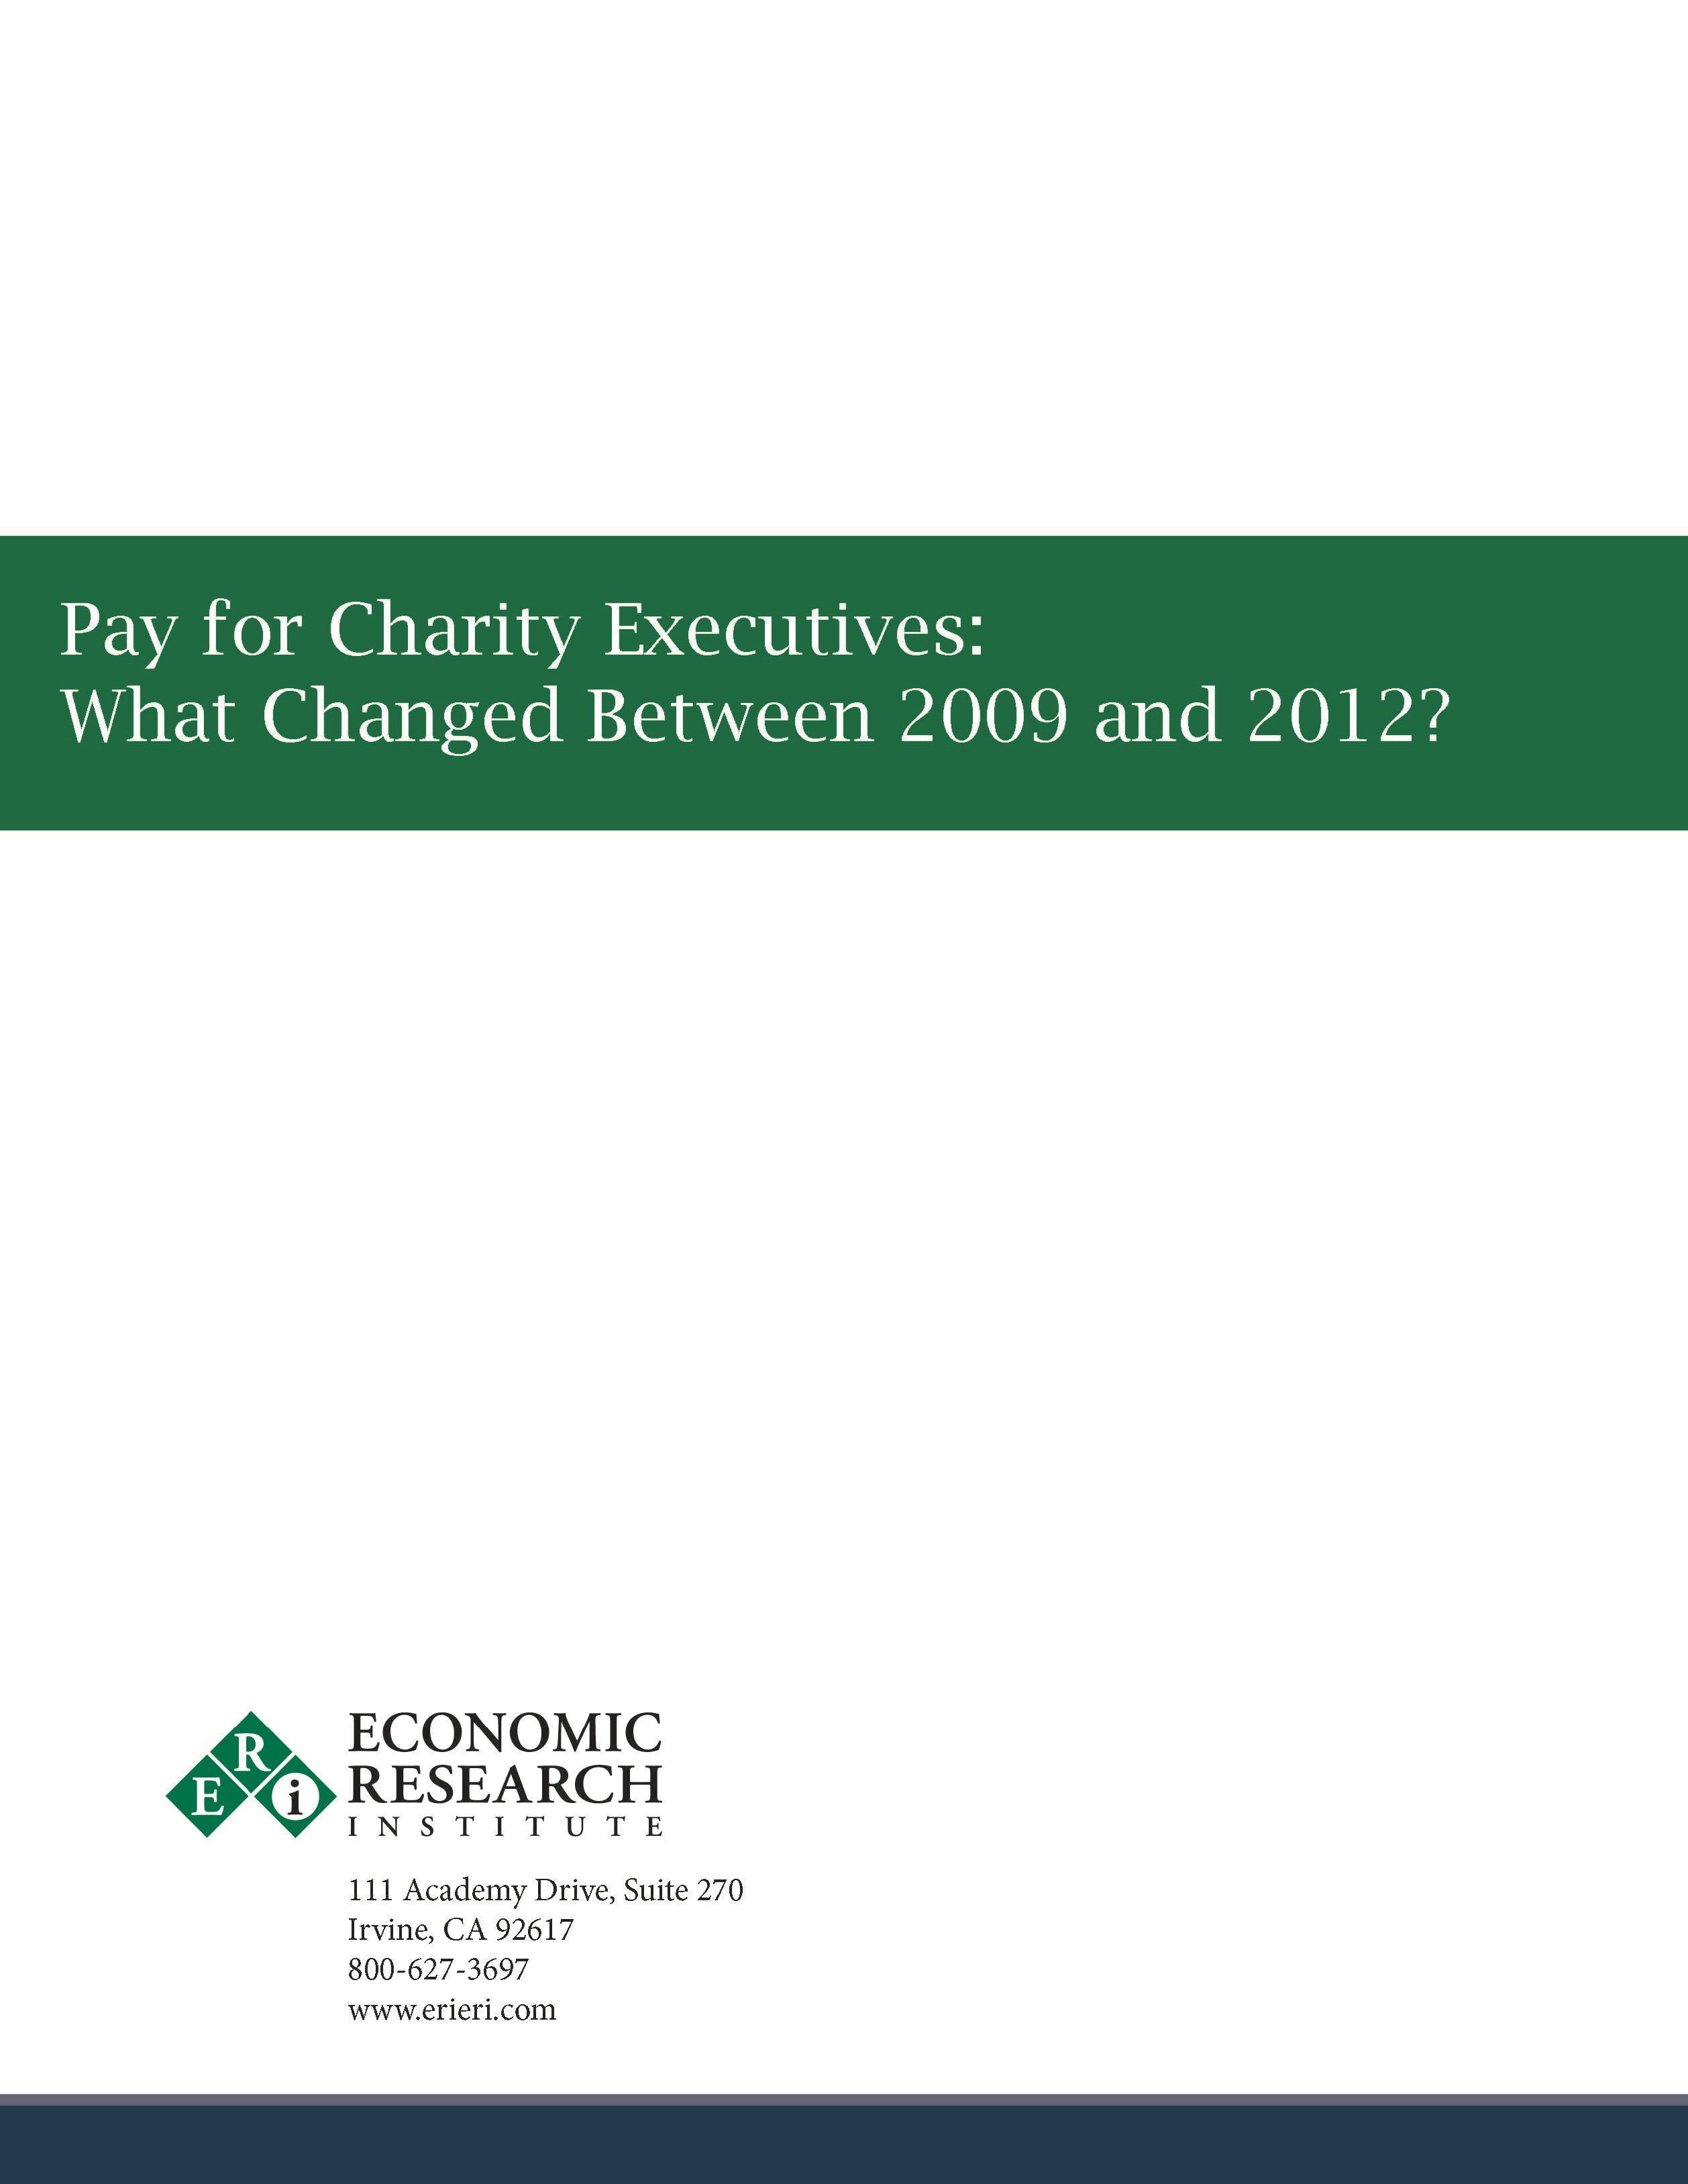 Pay for Charity Executives Between 2009 and 2012_Page_01